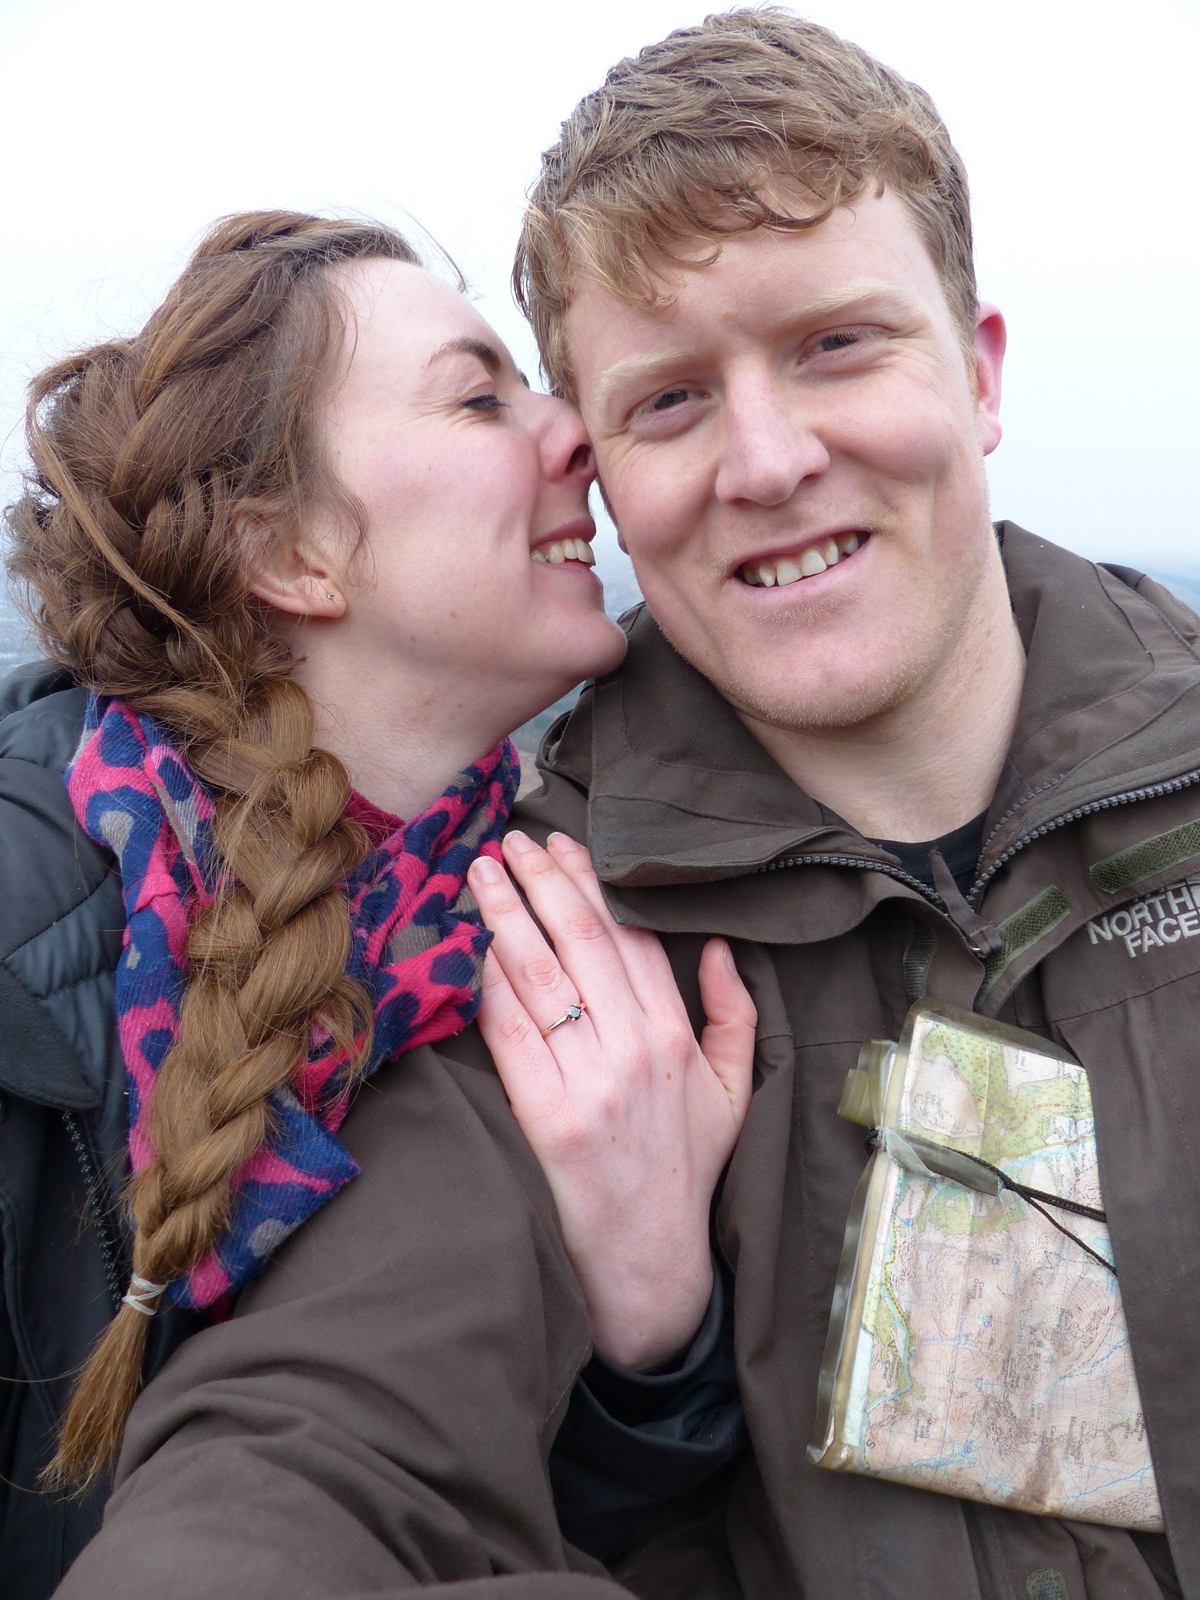 Eve and Adam's proposal story. If you would like to share your engagement story on Love My Dress - get in touch! Details at the end of this feature.